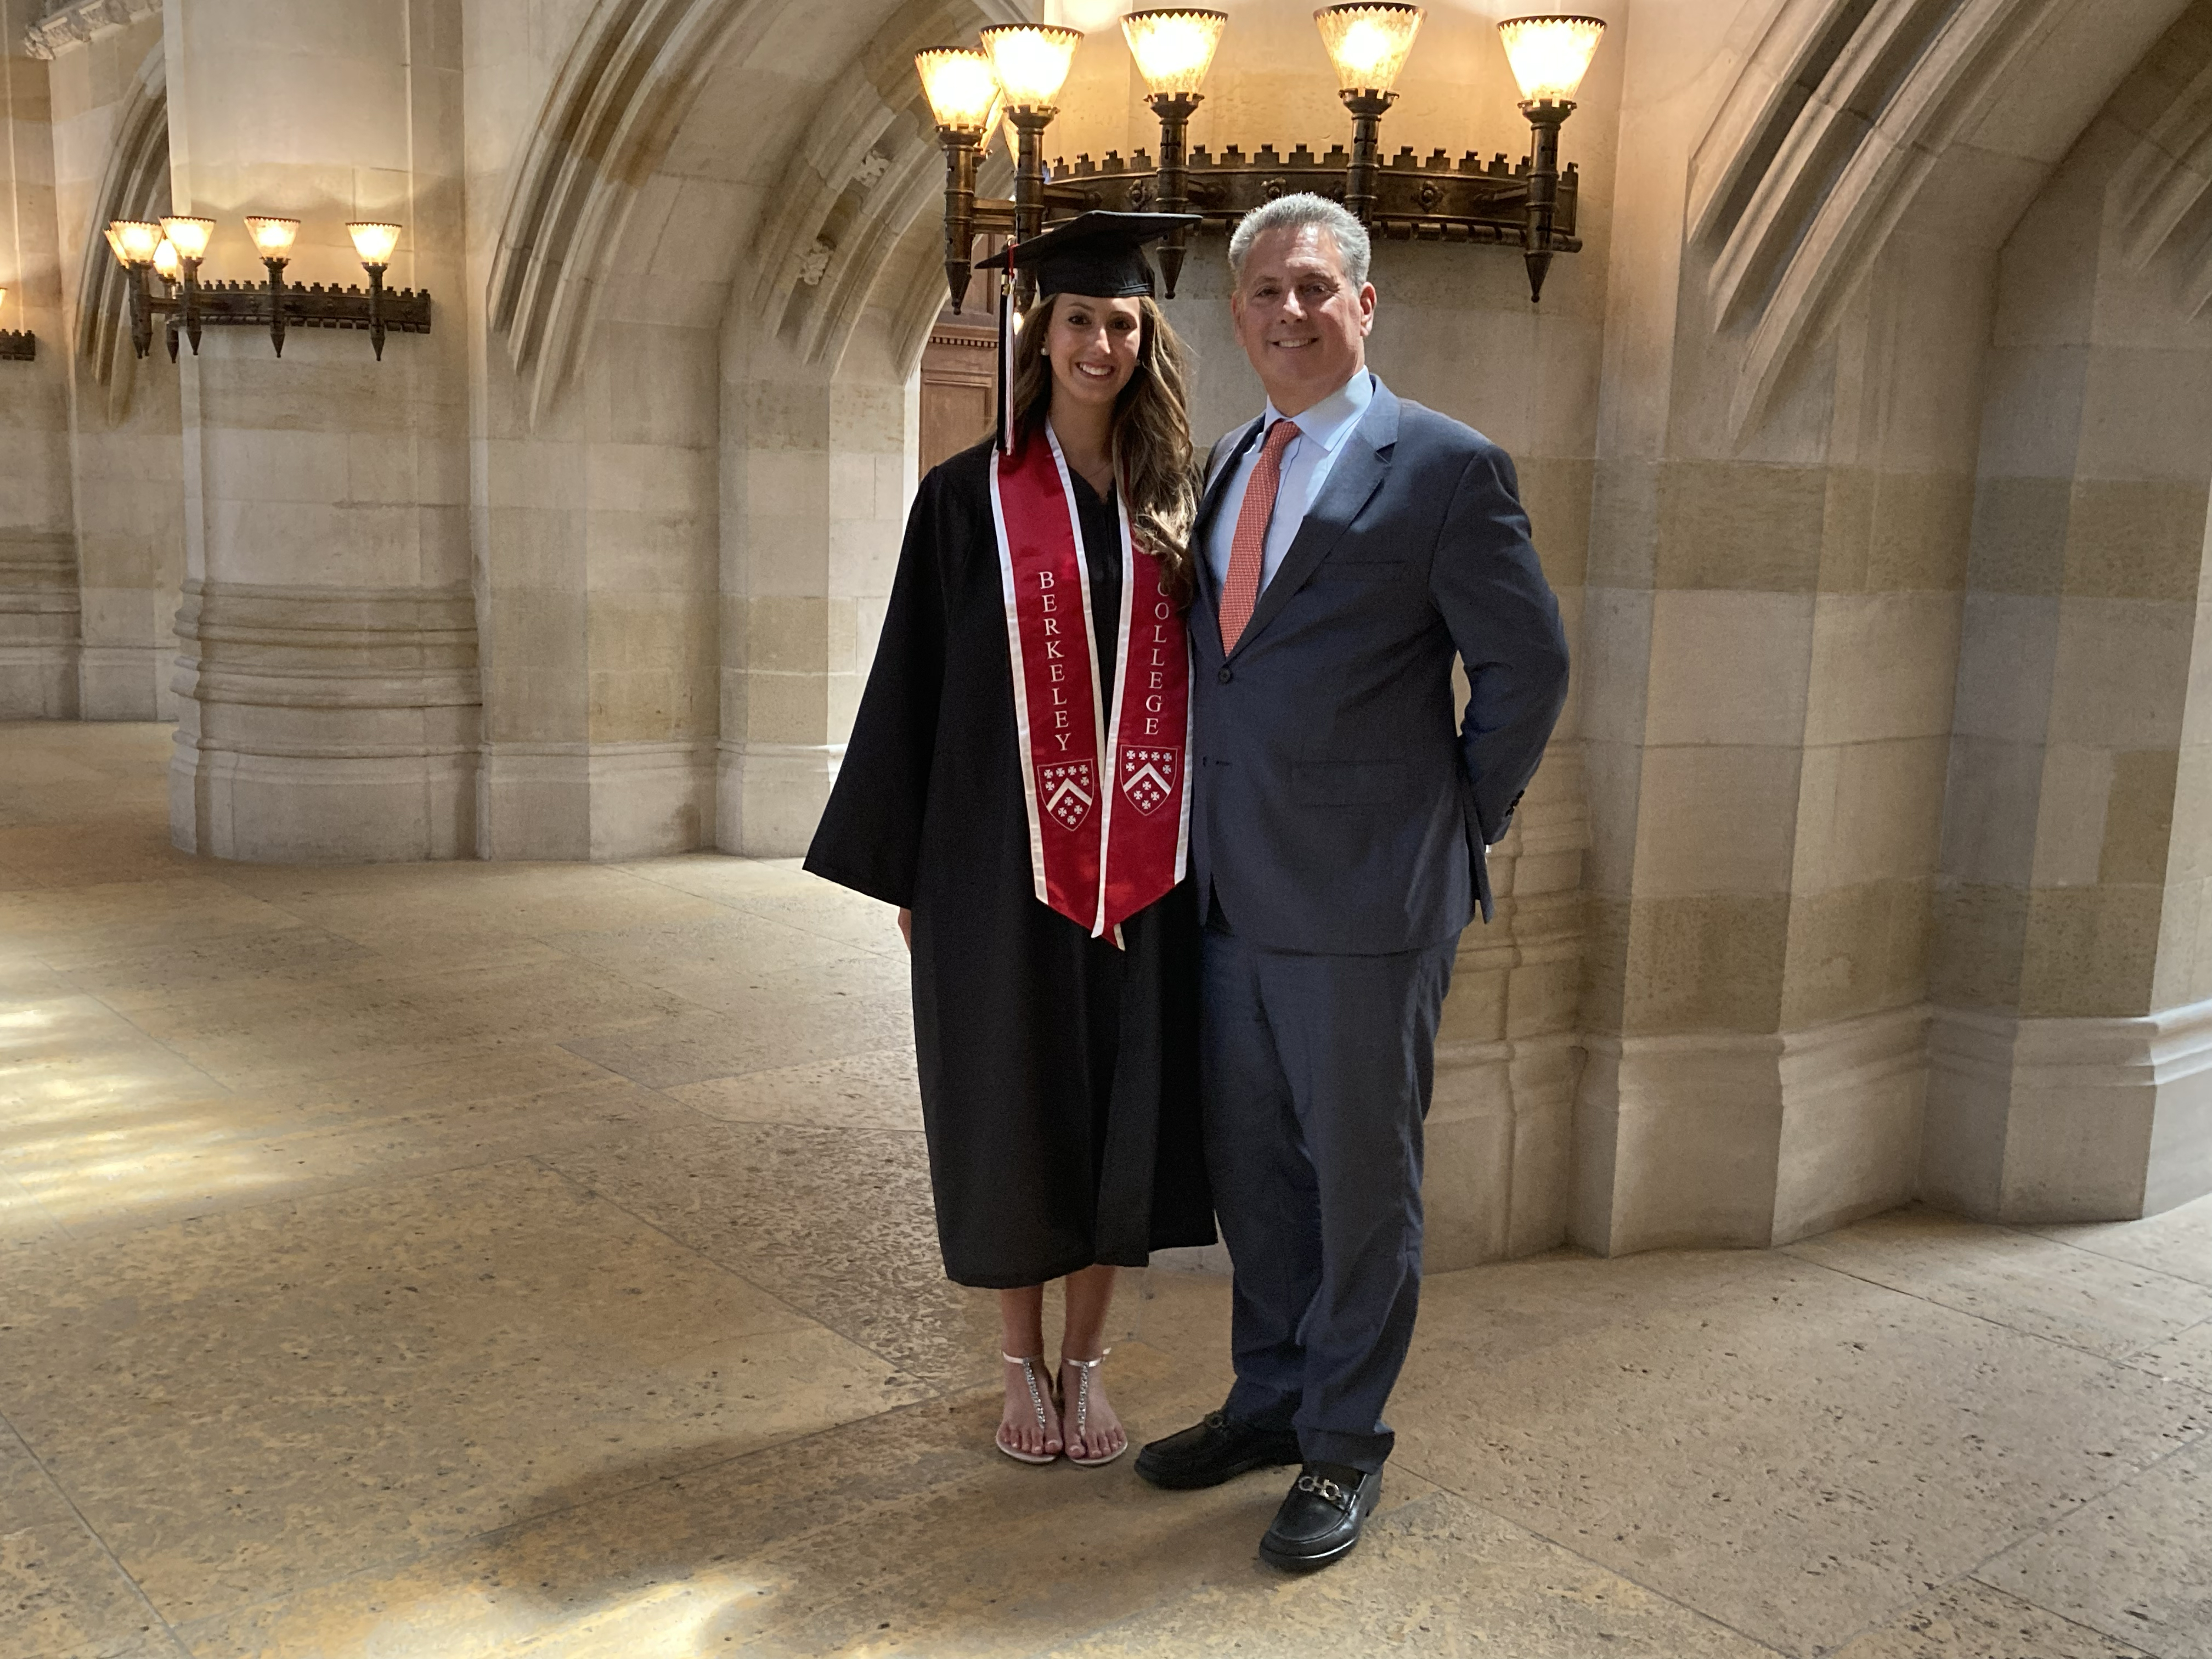 Tall female graduate with long brown hair wearing cap and gown and red Berkeley College stole stands in Sterling nave, next to her proud father, who is wearing a grey suit with blue shirt and red tie. They stand below five lights that curve around one of the nave's columns.